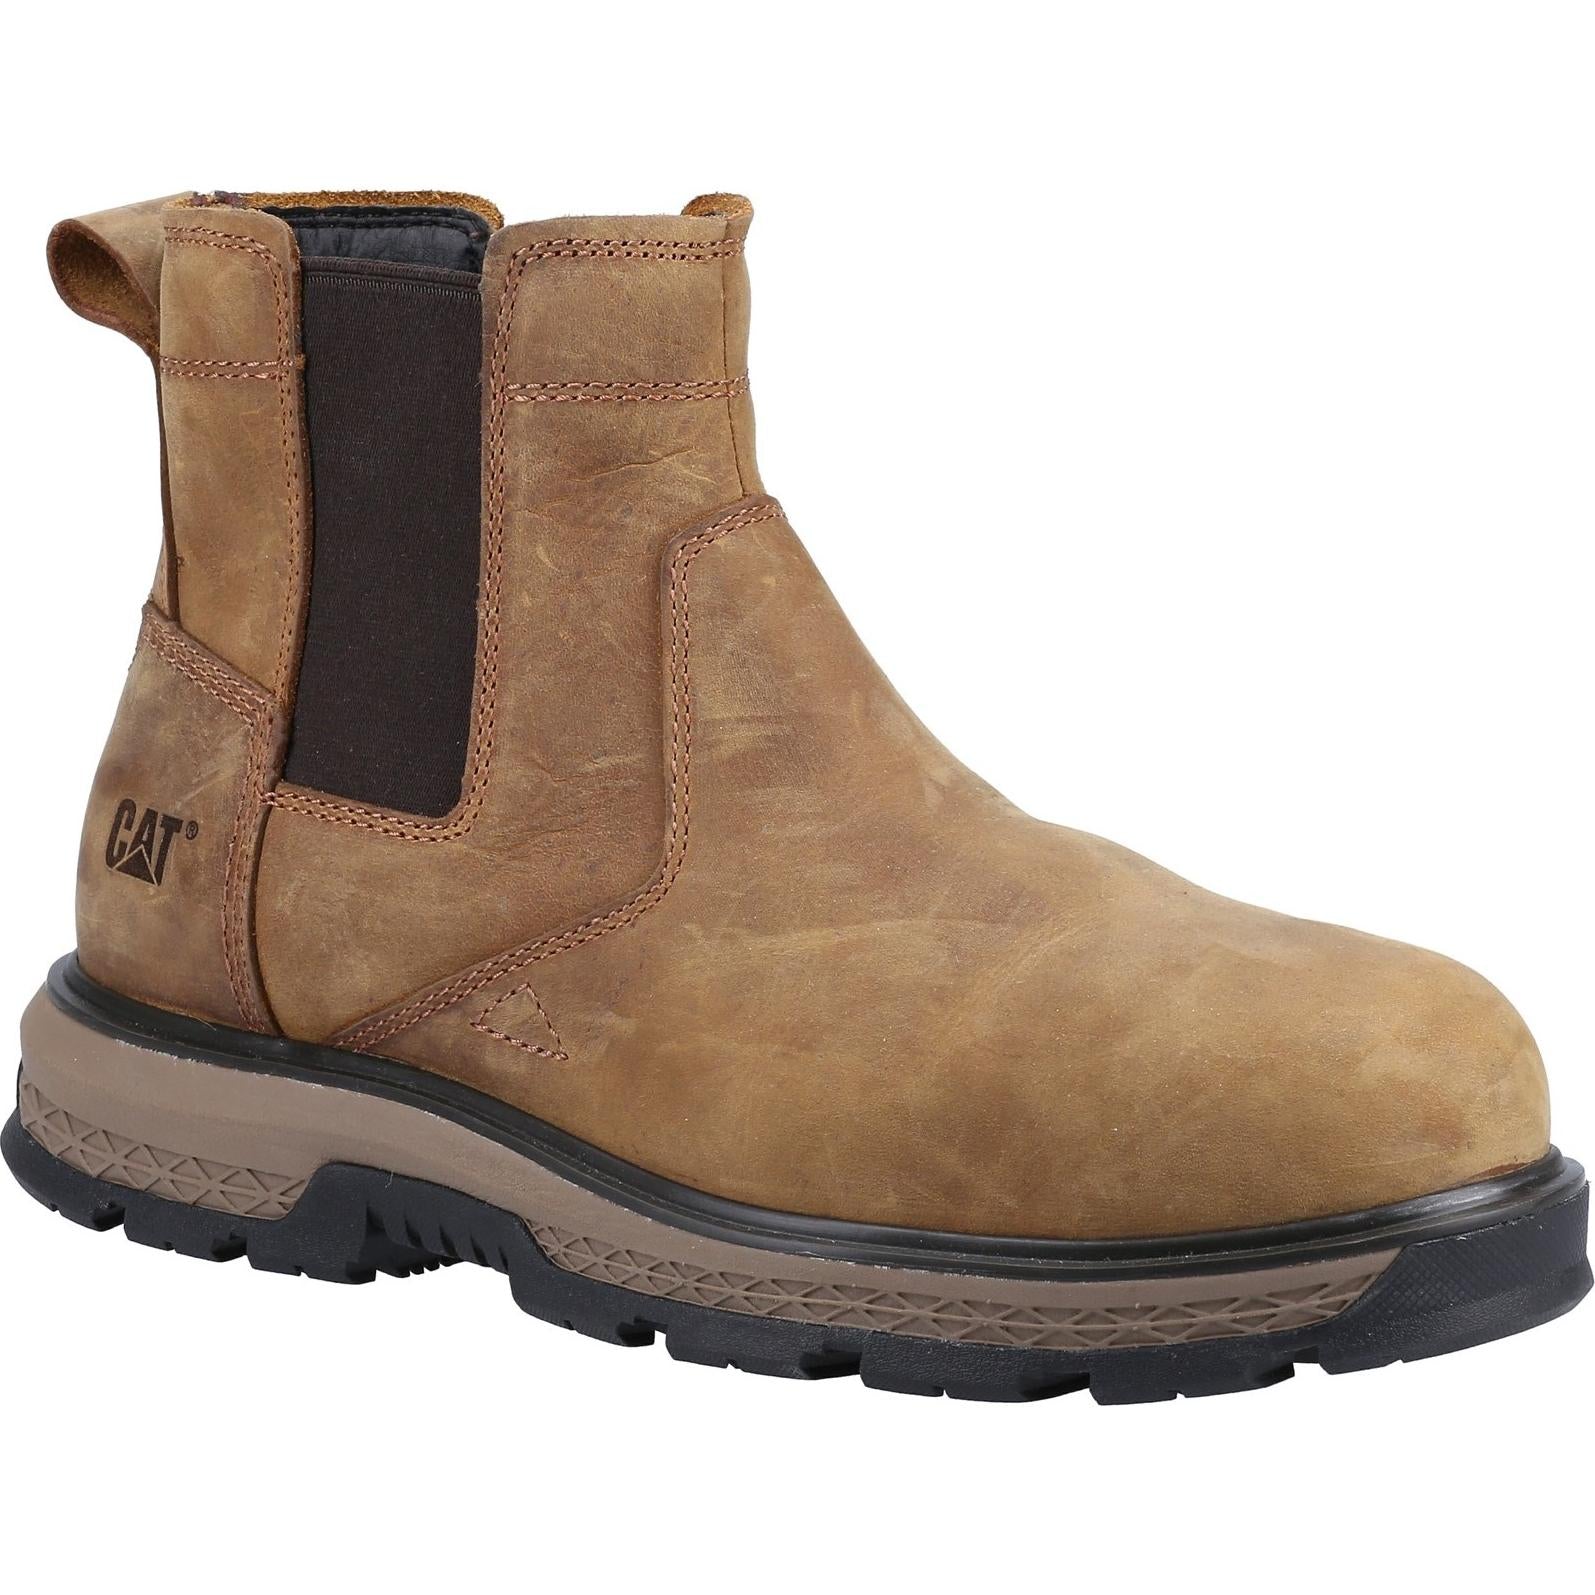 Cat Footwear Exposition Chelsea Safety Boot